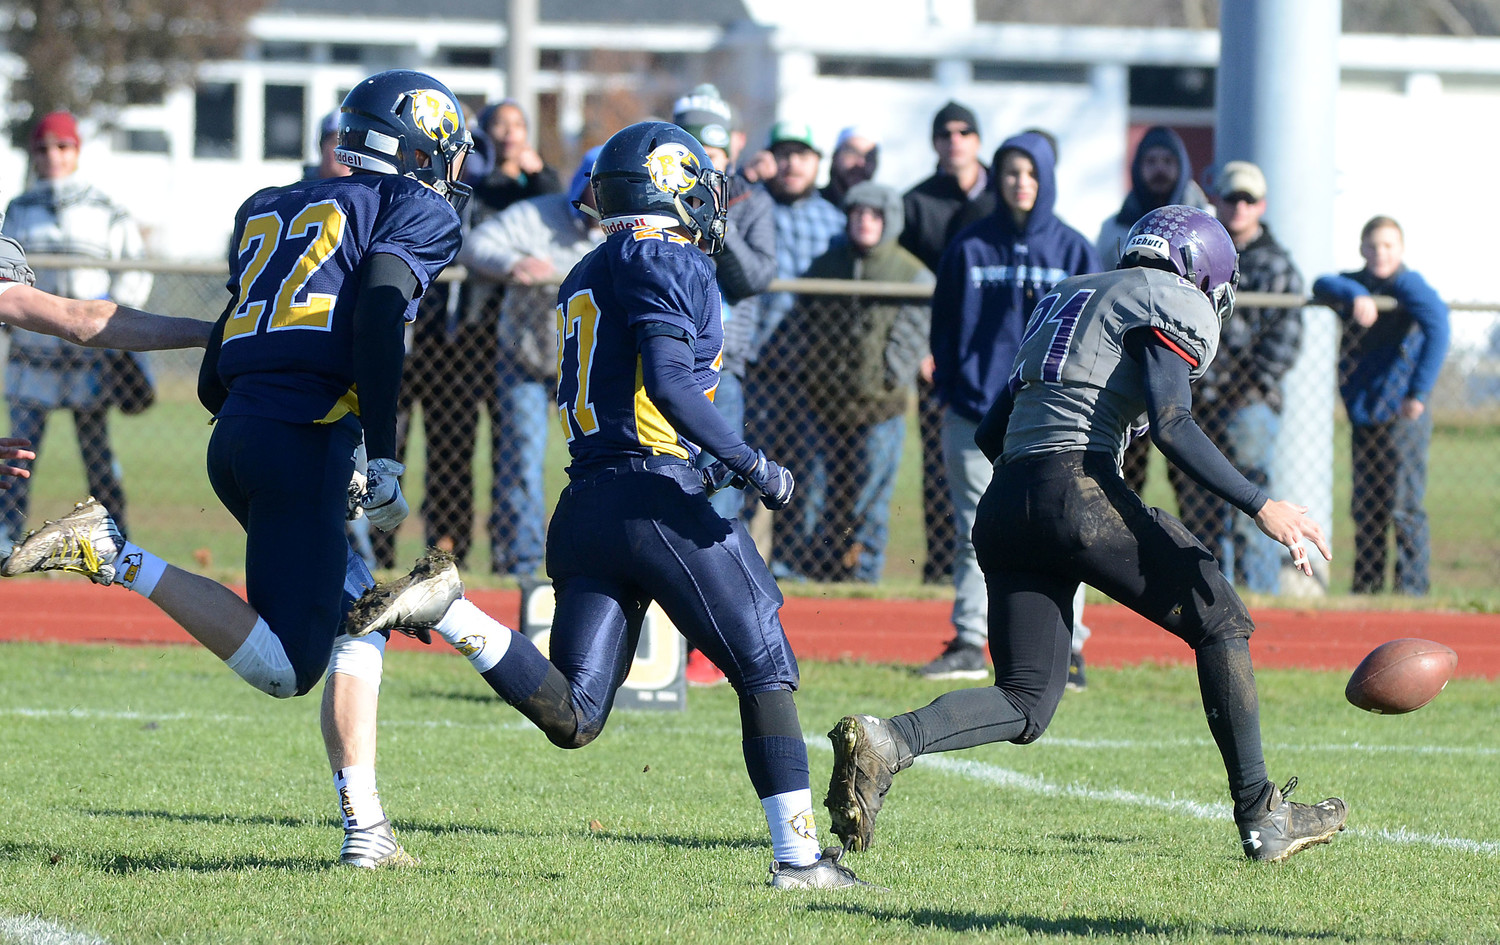 Dylan Martins chases the blocked ball and recovers it inside the Barrington 10 yard line.